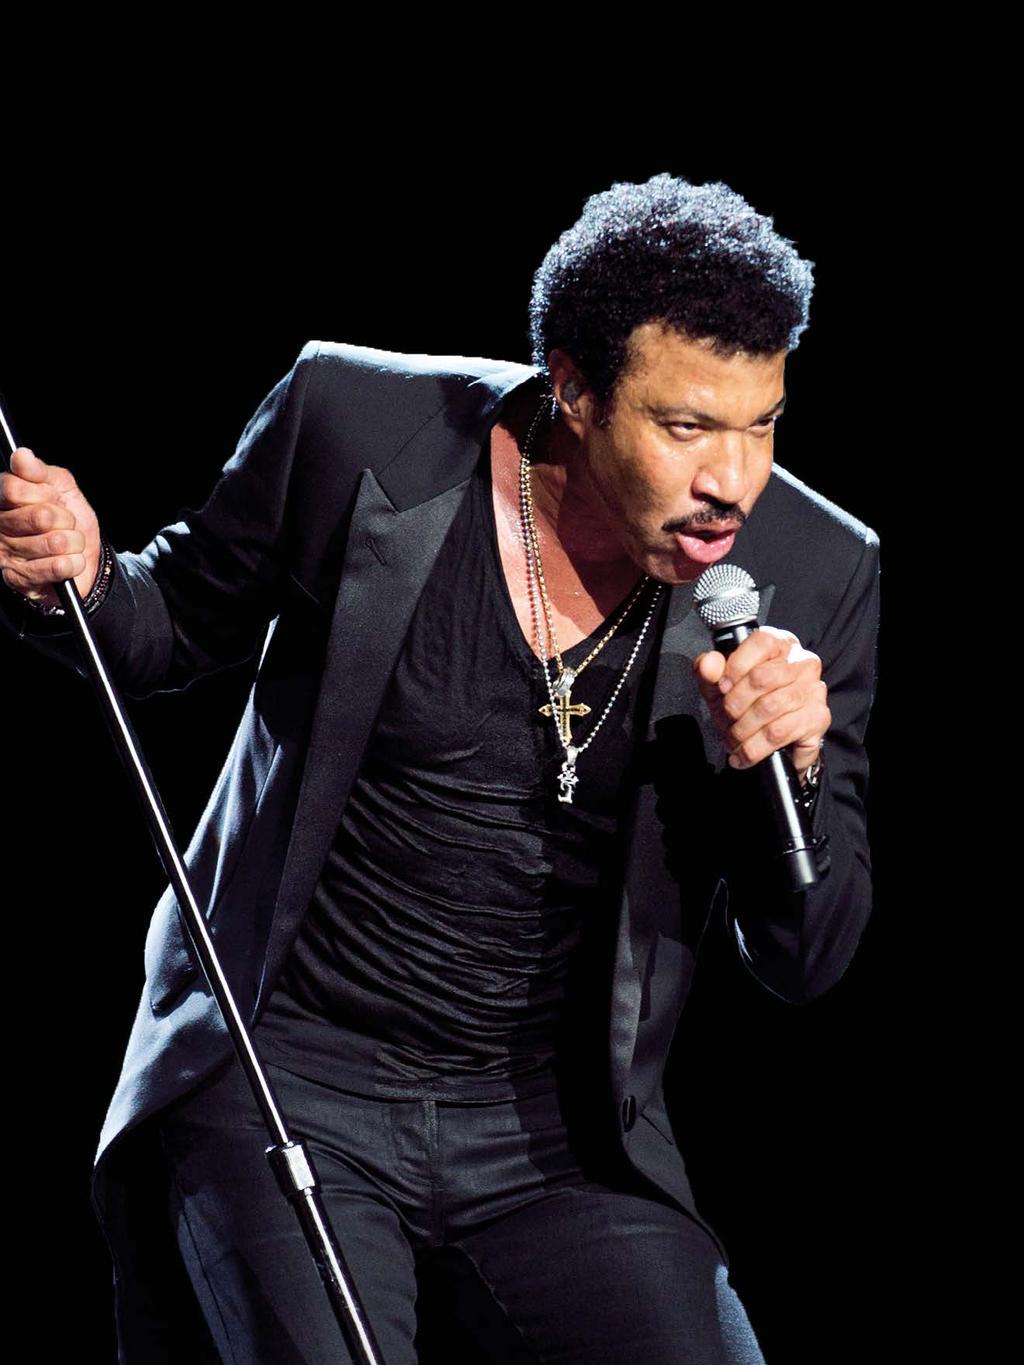 Our 2016 O2 Silver Clef Award Winner PRESENTING LIONEL RICHIE... I am so proud to be one of the few Americans to receive the O2 Silver Clef Award which supports such a wonderful charity.